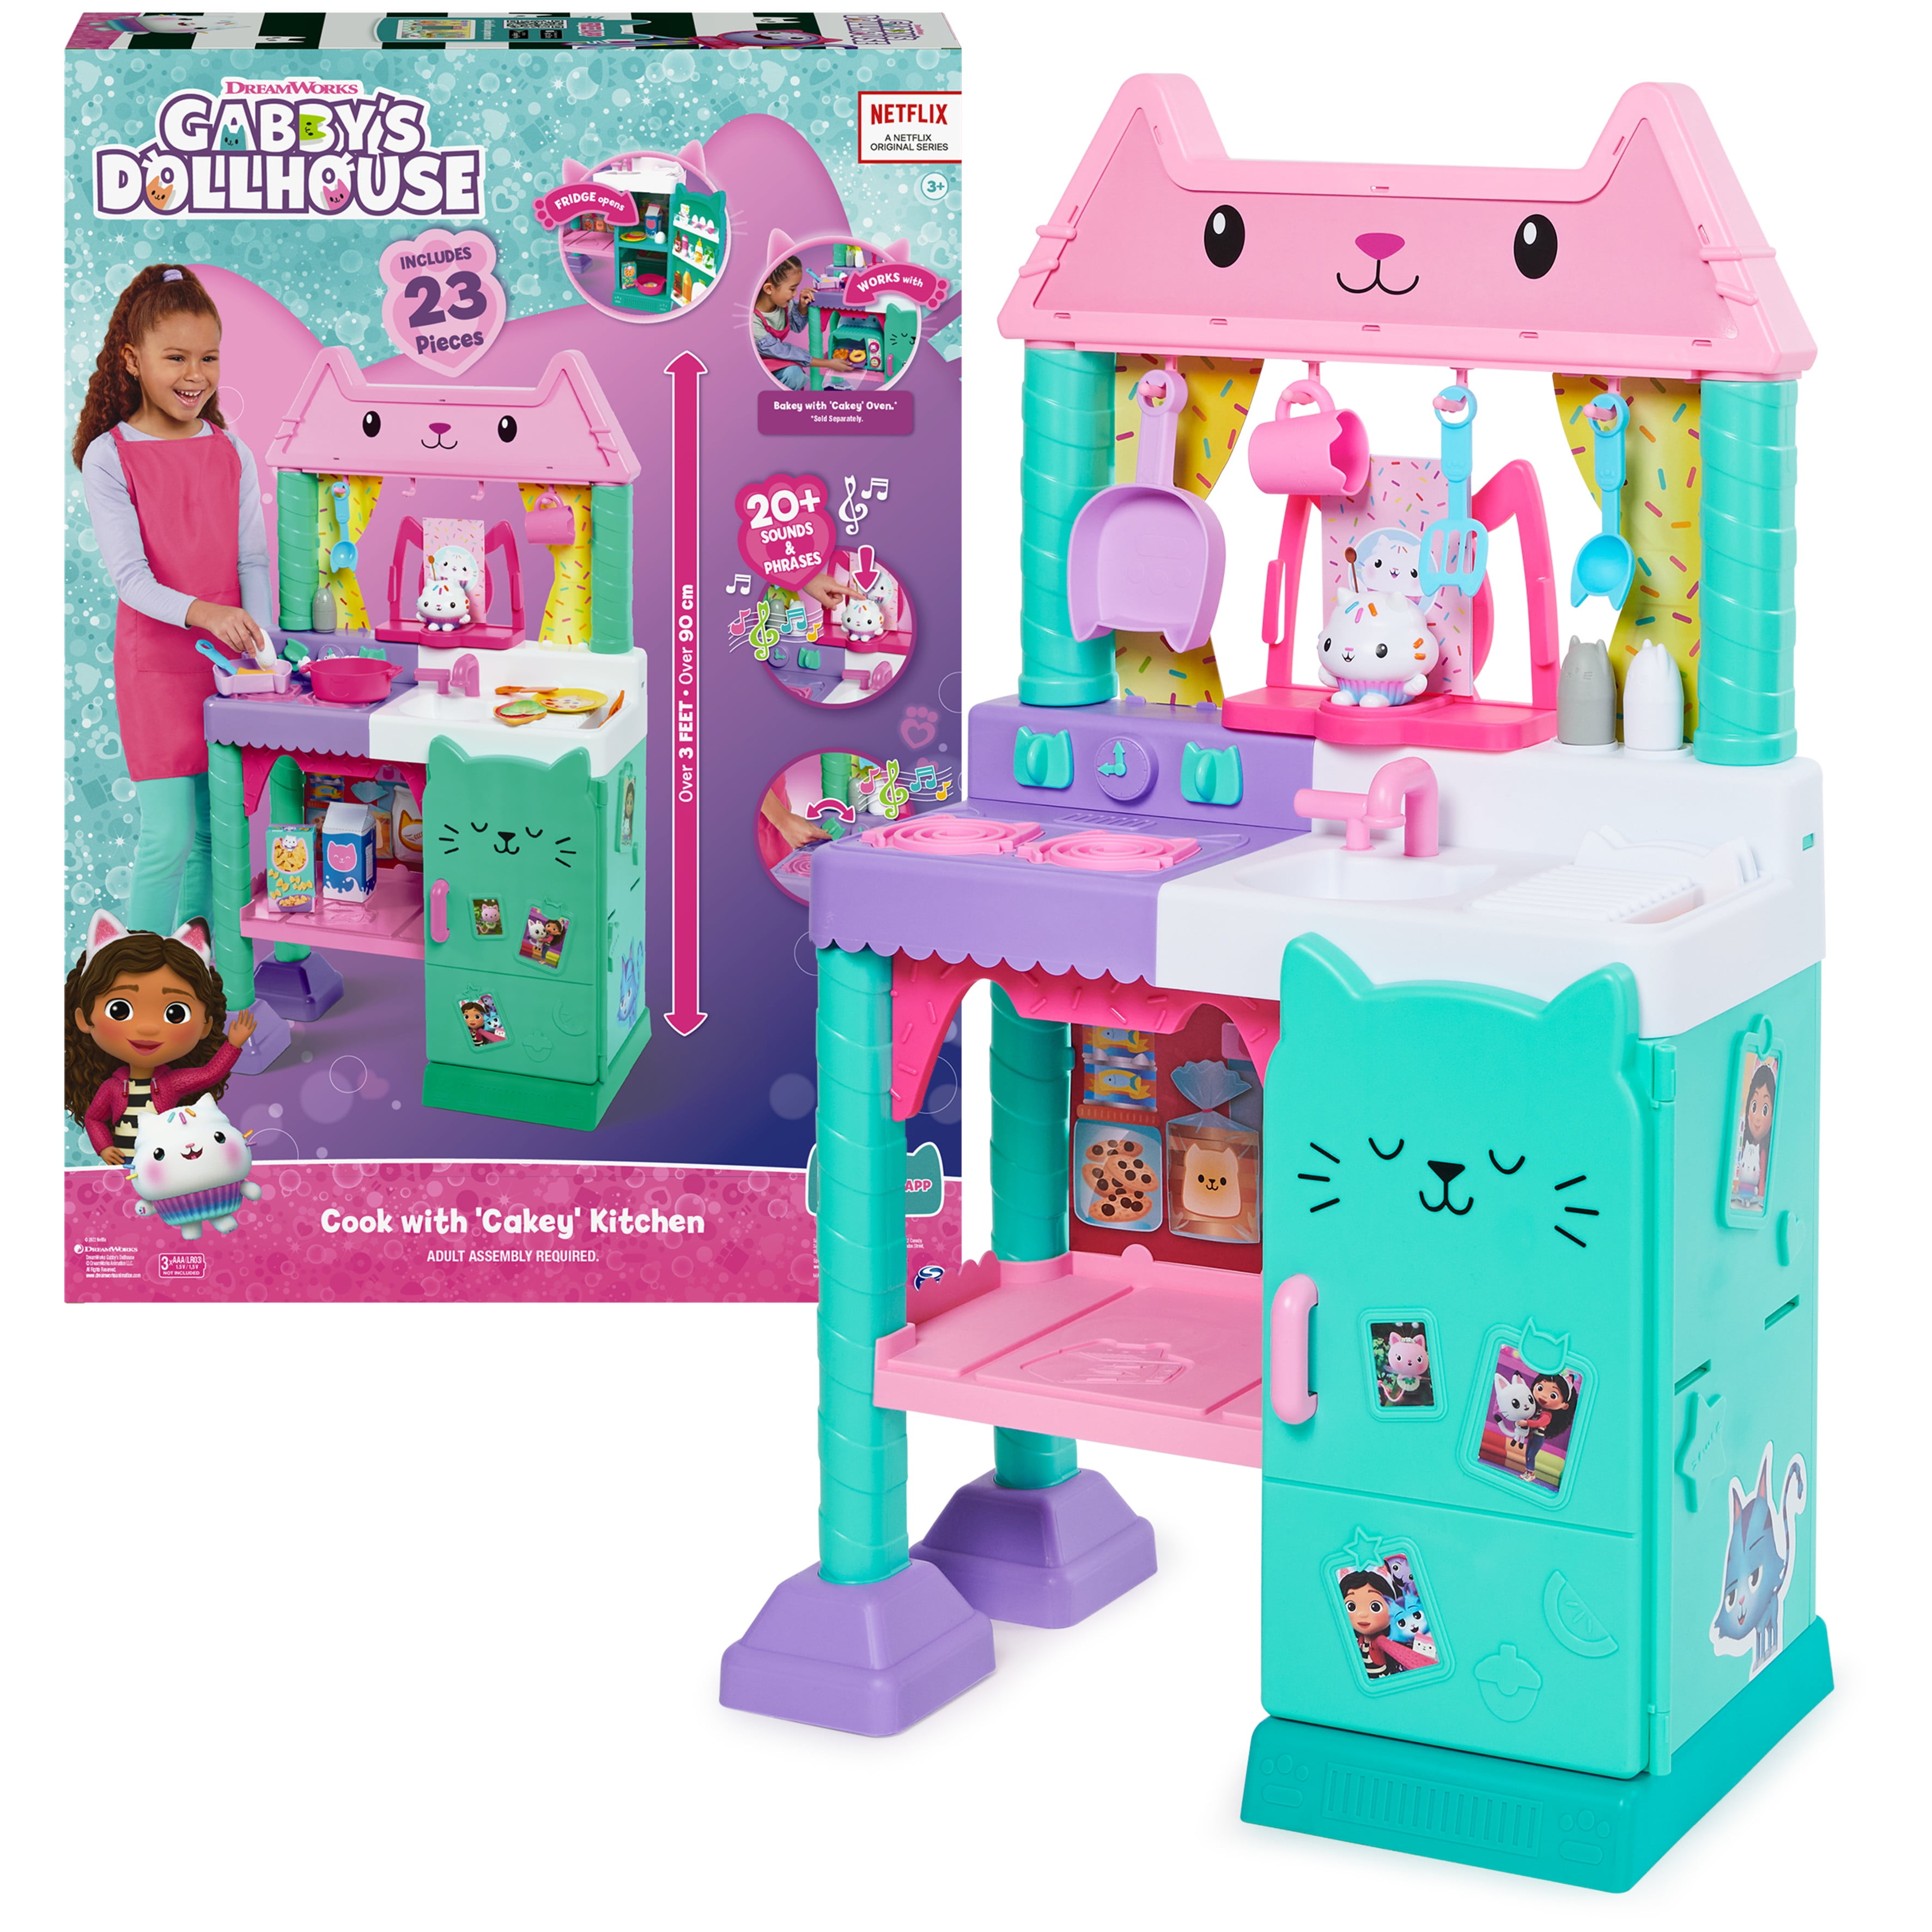 Gabby's Dollhouse Gabby’s Dollhouse, Cakey Kitchen Set for Kids with Play Kitchen Accessories, Play Food, Sounds, Music and Kids Toys for Girls and Boys Ages 3 and up